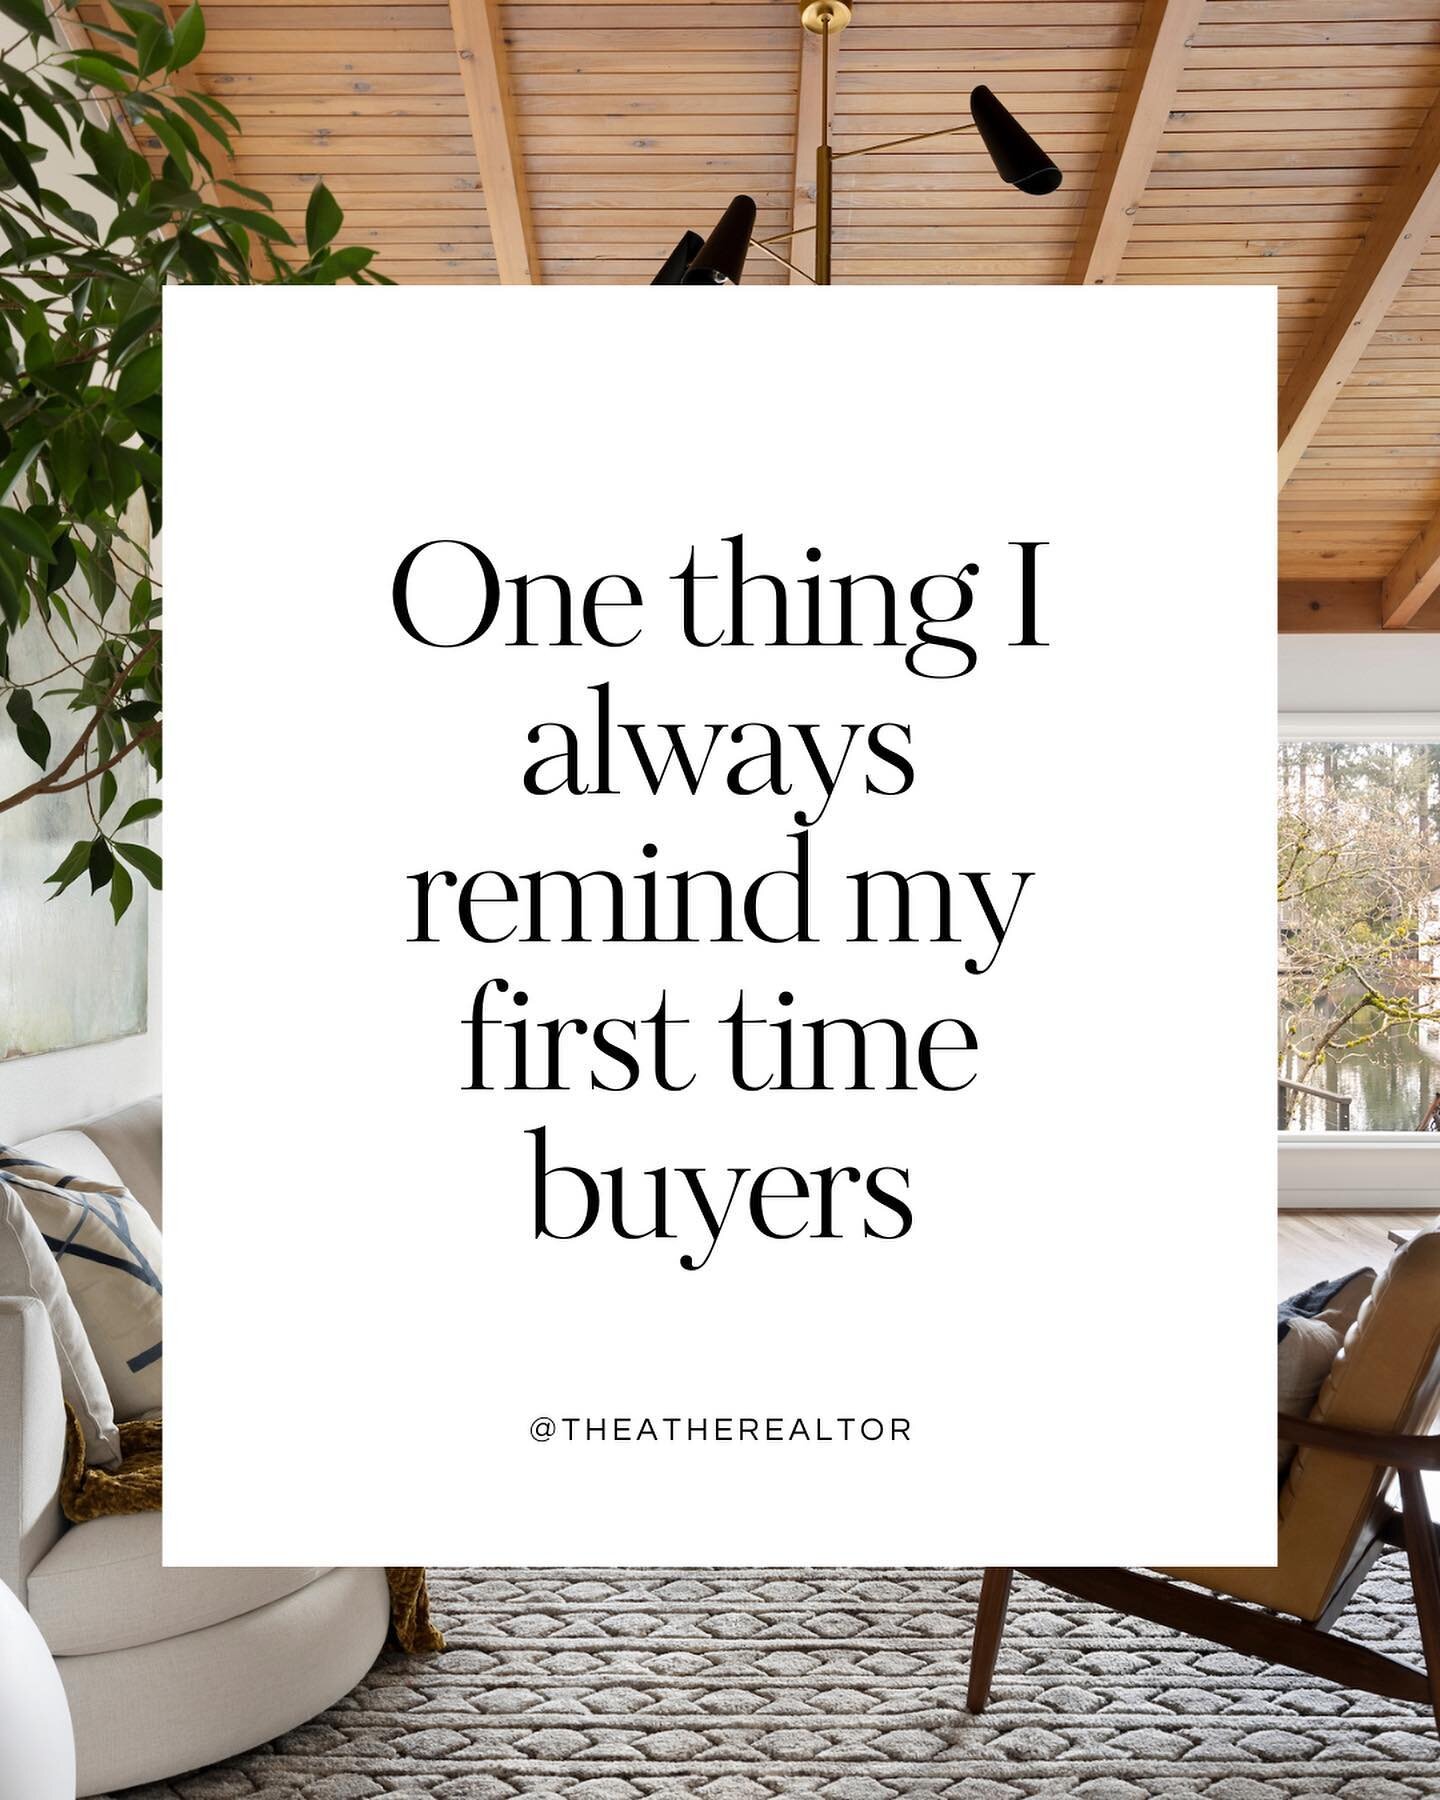 One of the biggest myths I see first-time buyers fall for is the idea that your first home needs to be your forever home. 

But the truth is, your needs and priorities will likely change over time, and it's important to embrace that. 

Think of your 